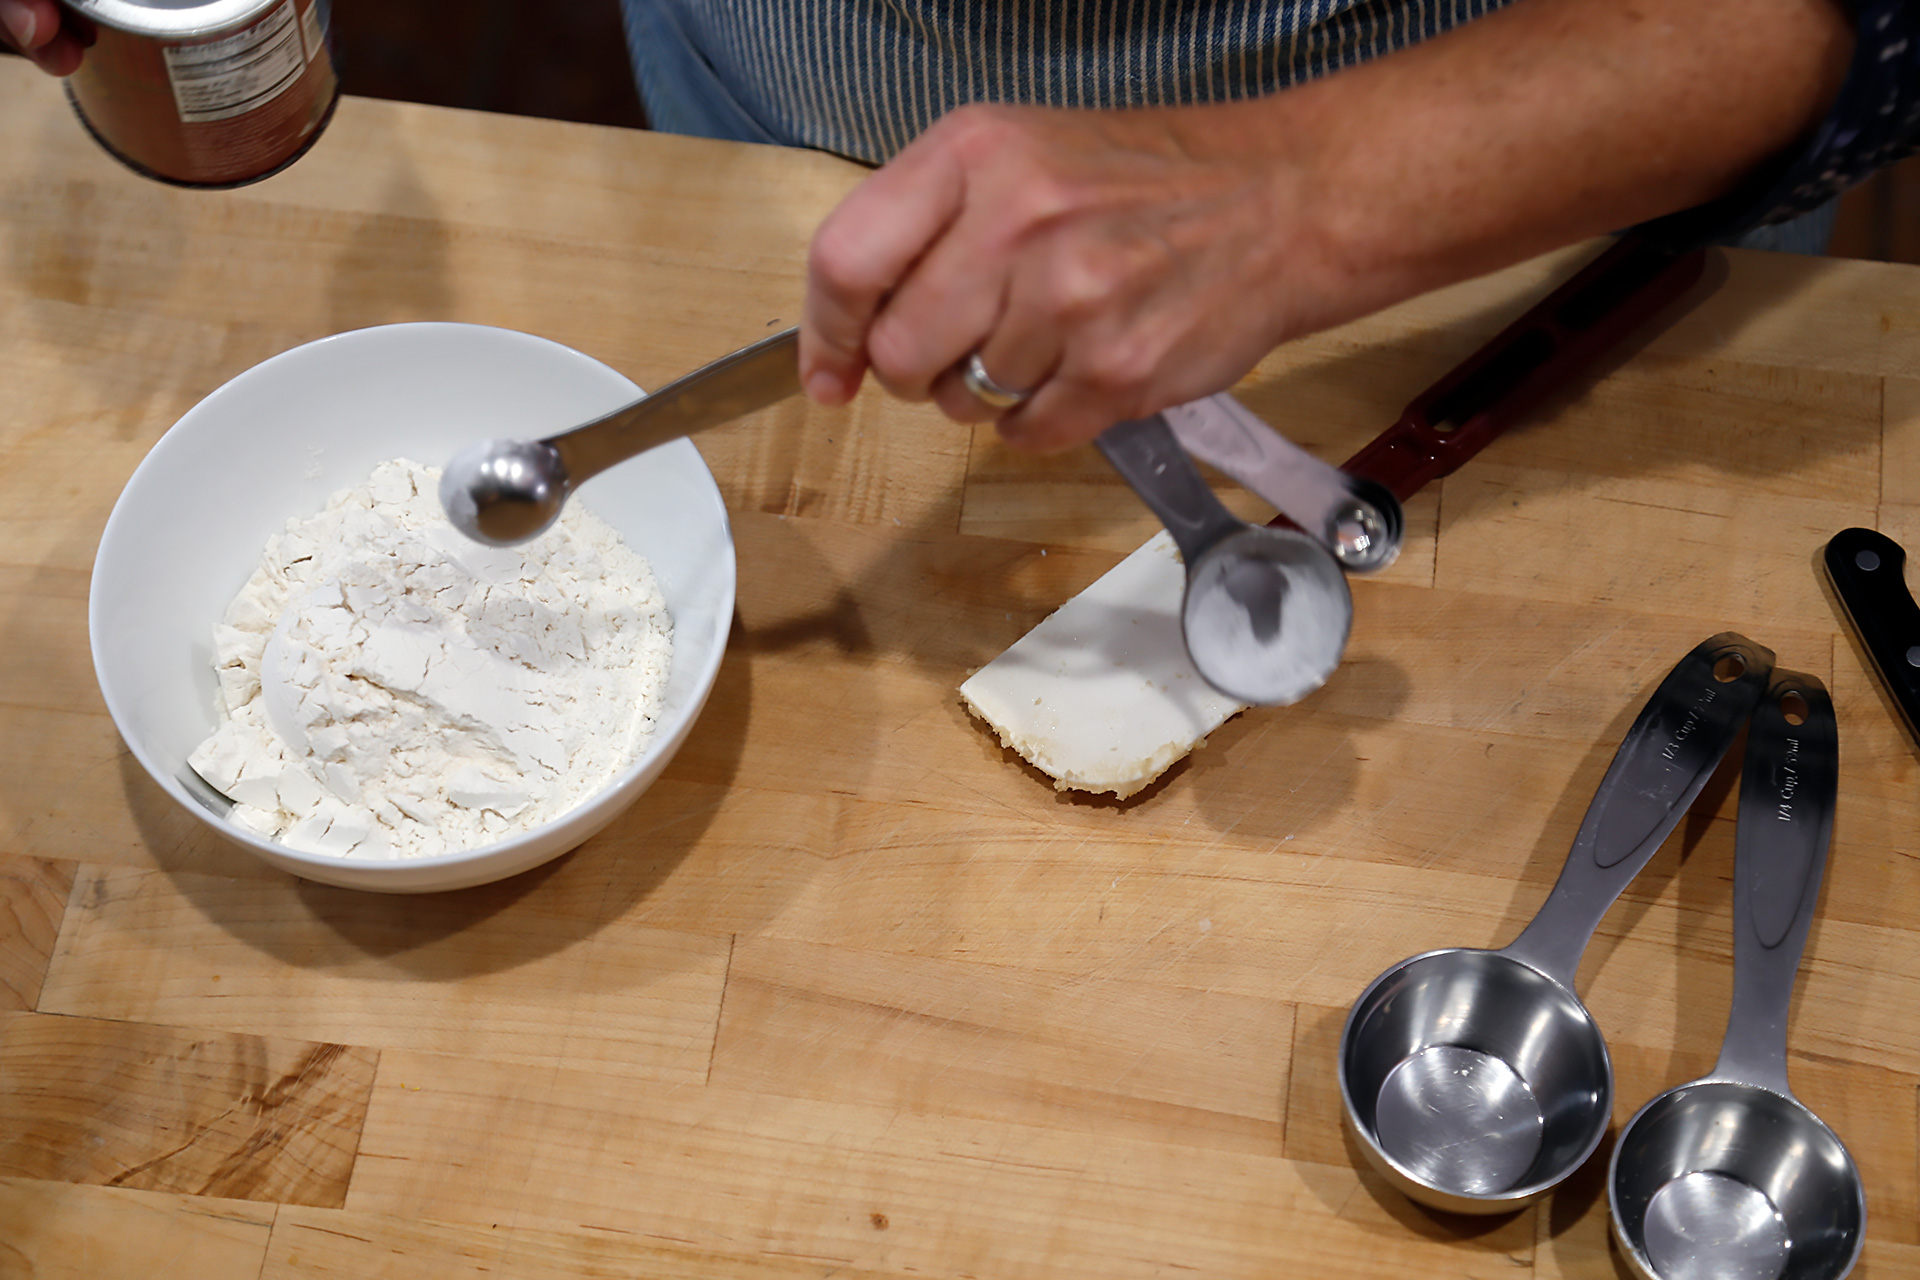 In another bowl, whisk together the flour and baking soda.